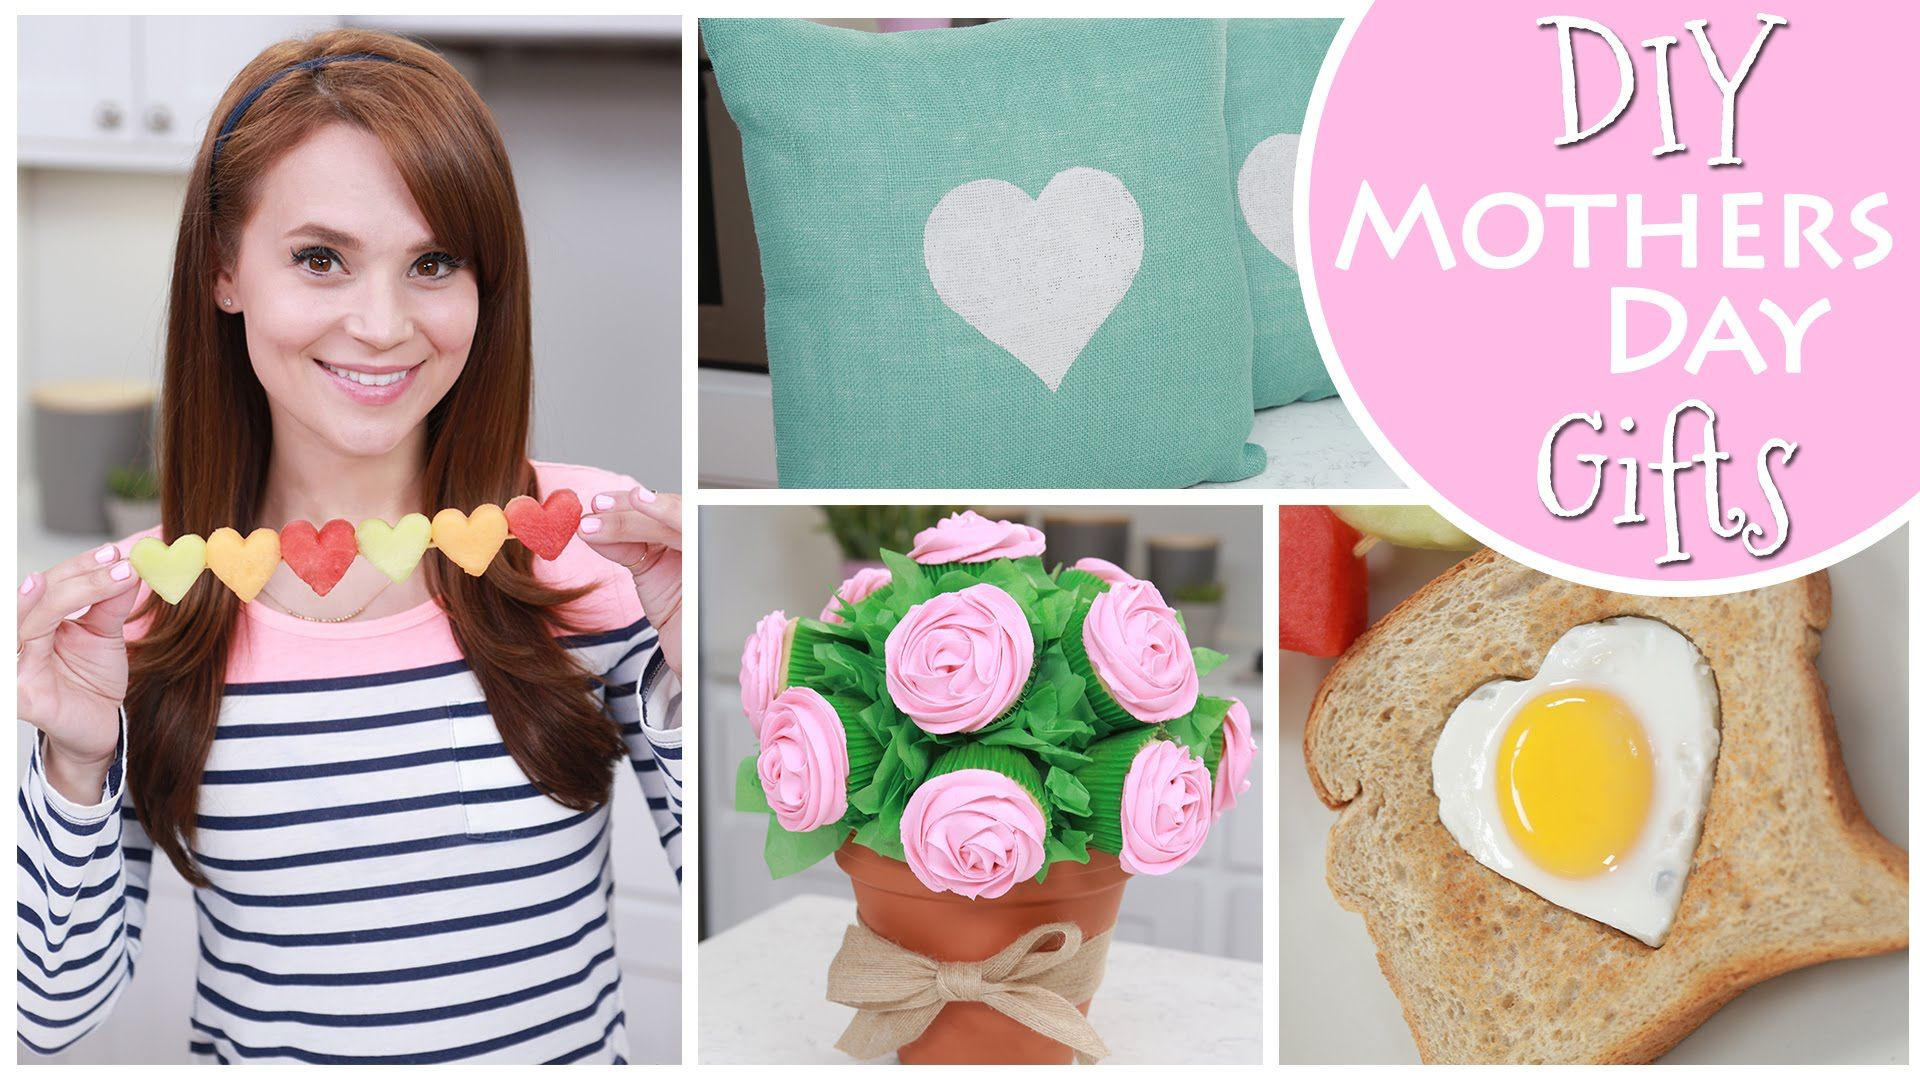 Pinterest Mothers Day Gift Ideas
 DIY MOTHERS DAY GIFT IDEAS Videos